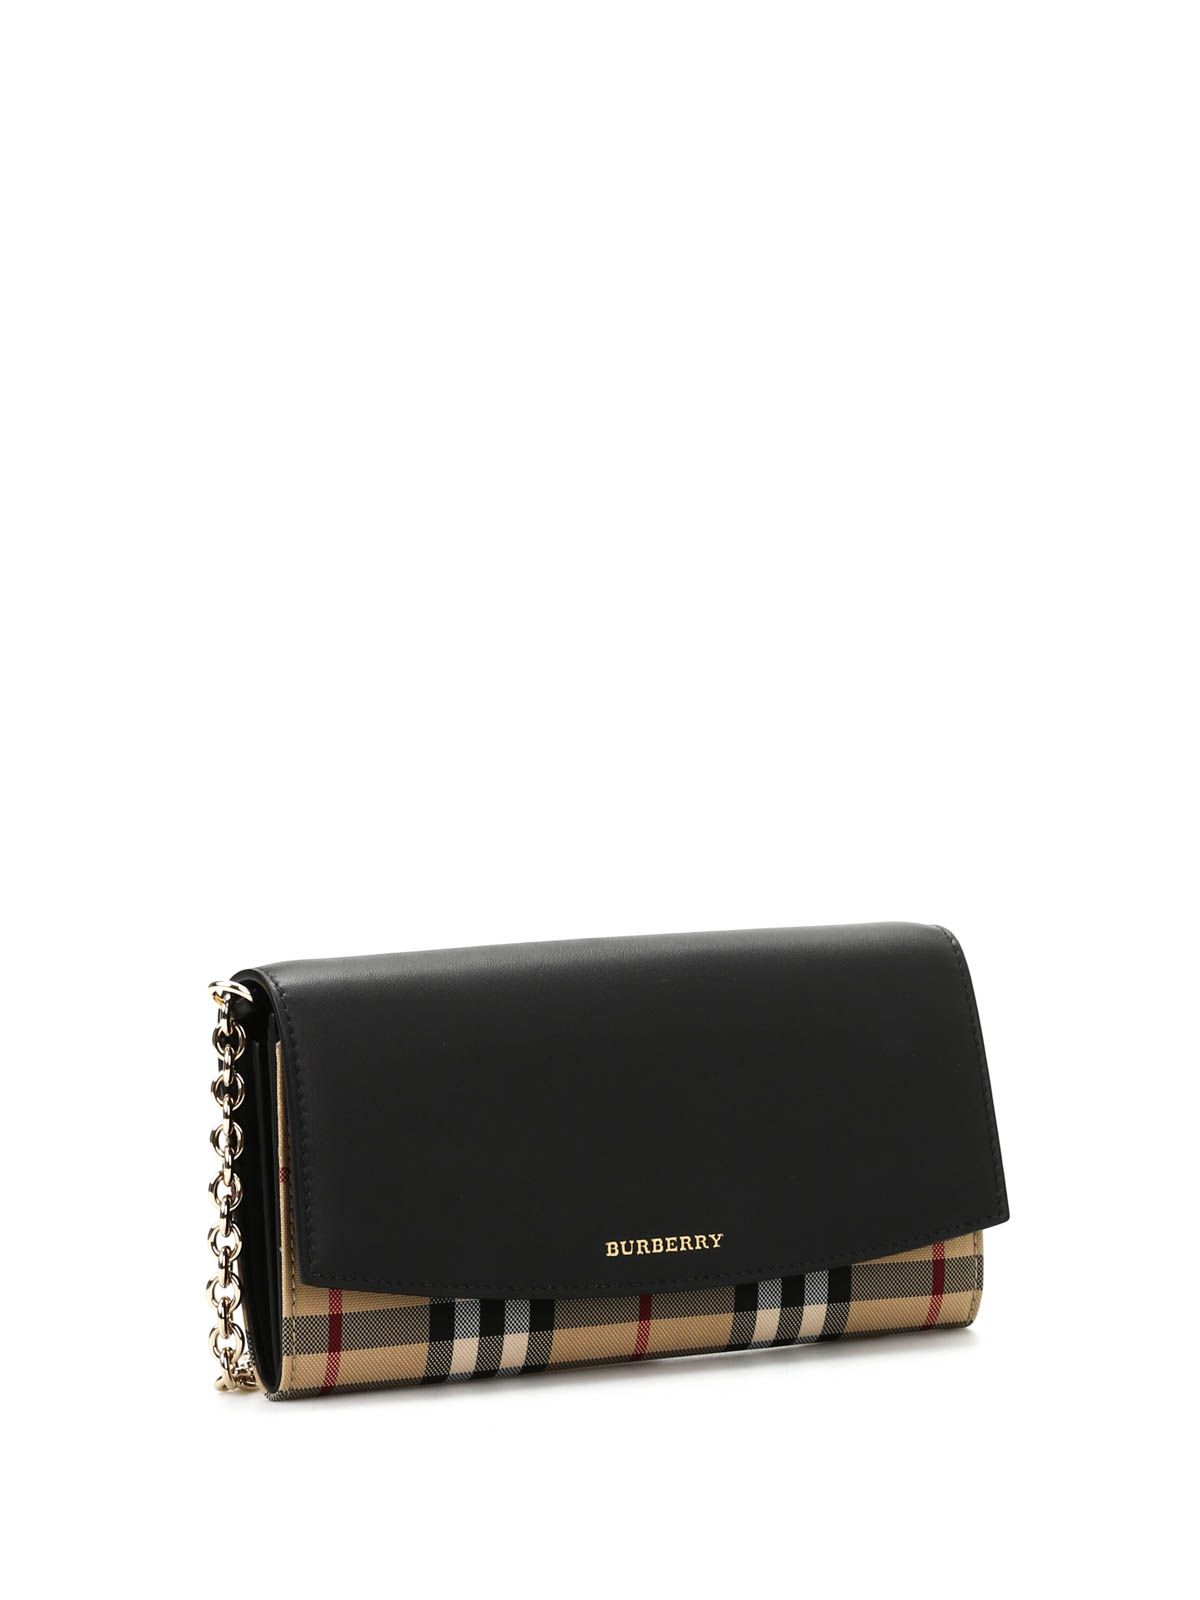 Burberry - Wallet cross body bag with 